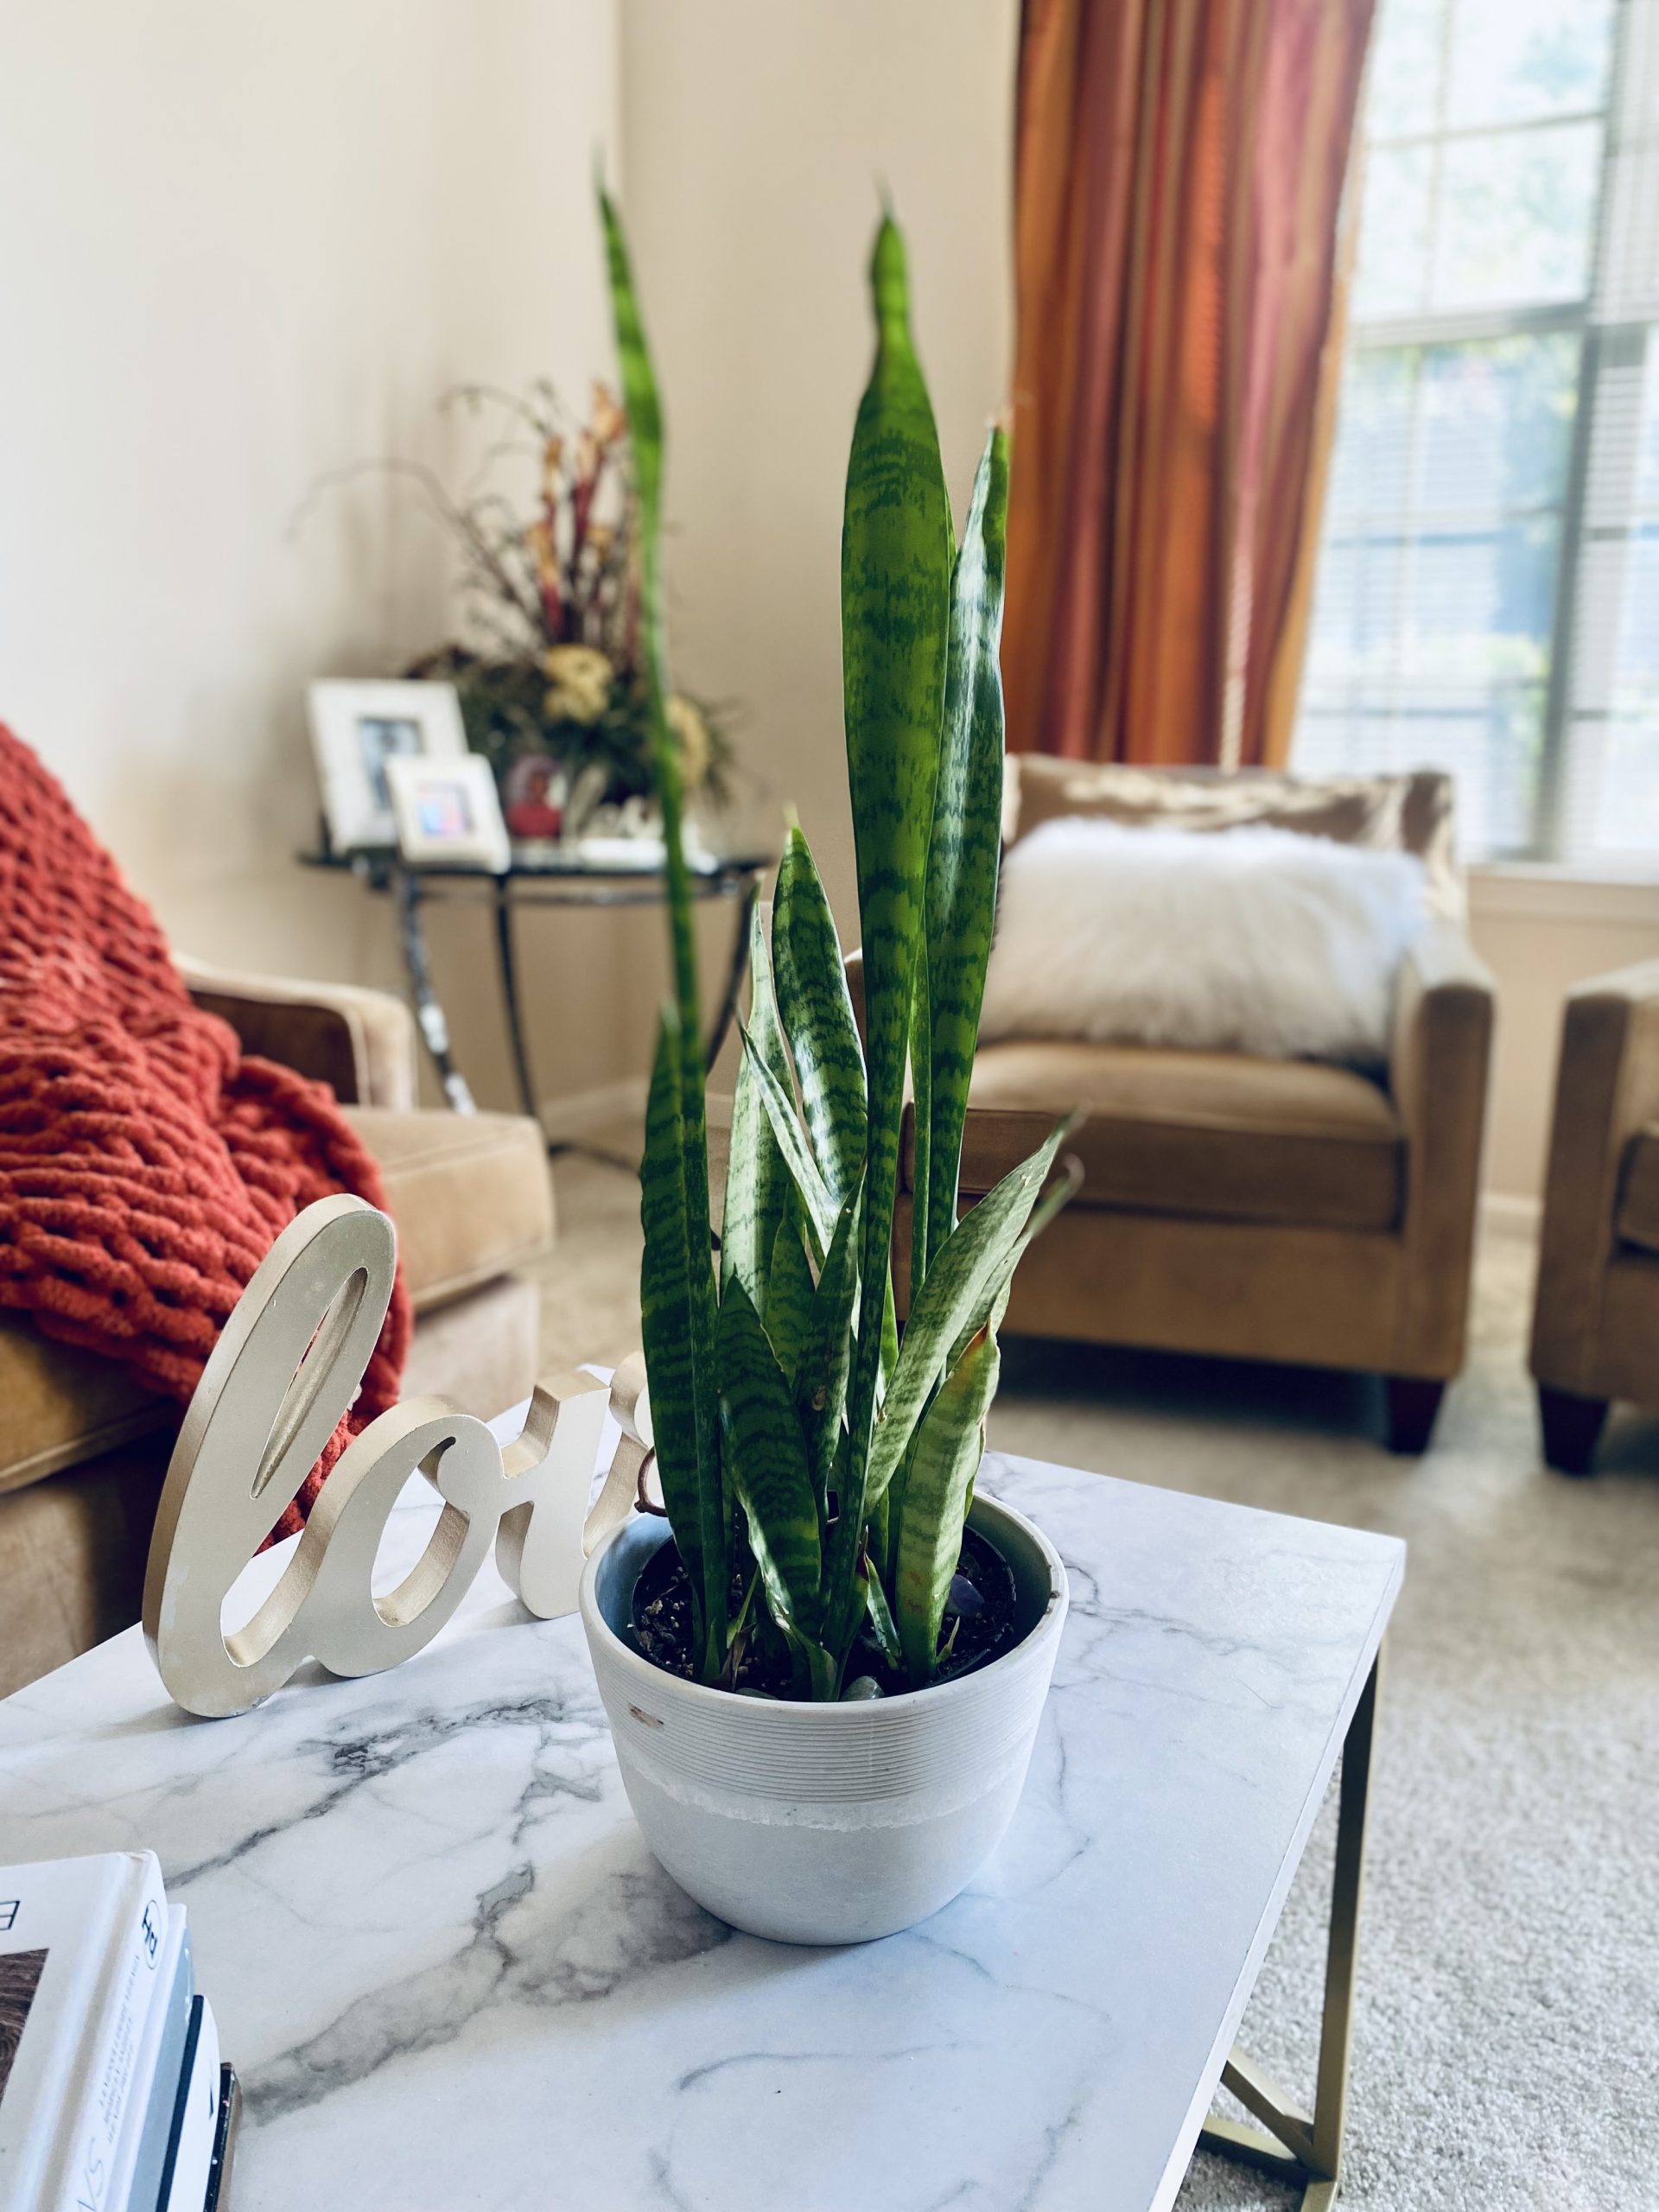 REVEALED: The Most Instagrammable Houseplants